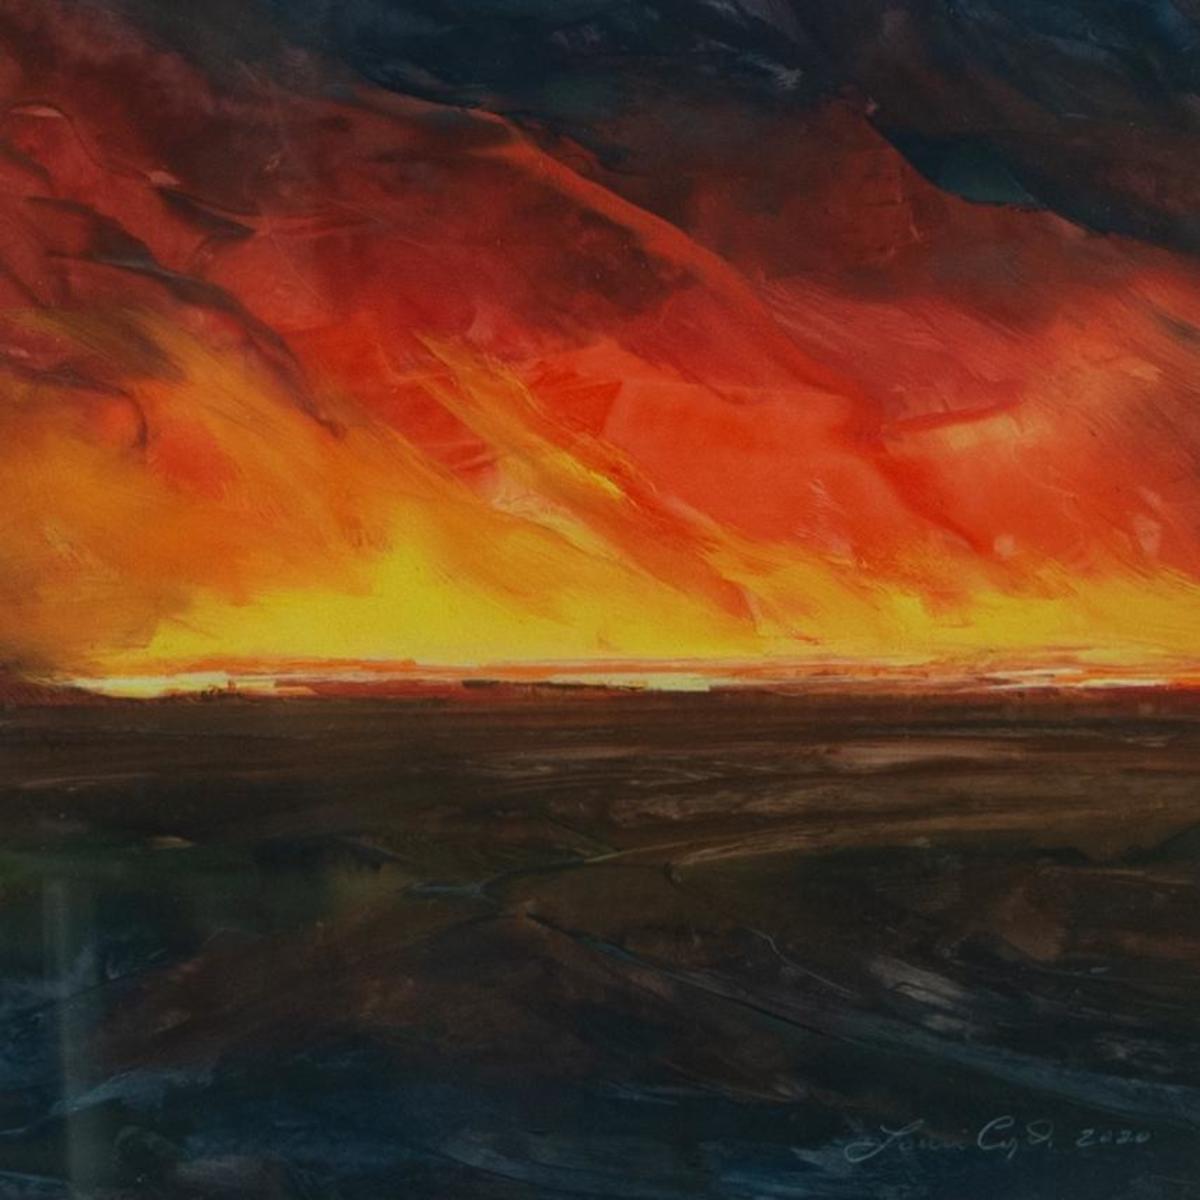 Copt - "Wall of Fire" - Framed - Oil on Mylar